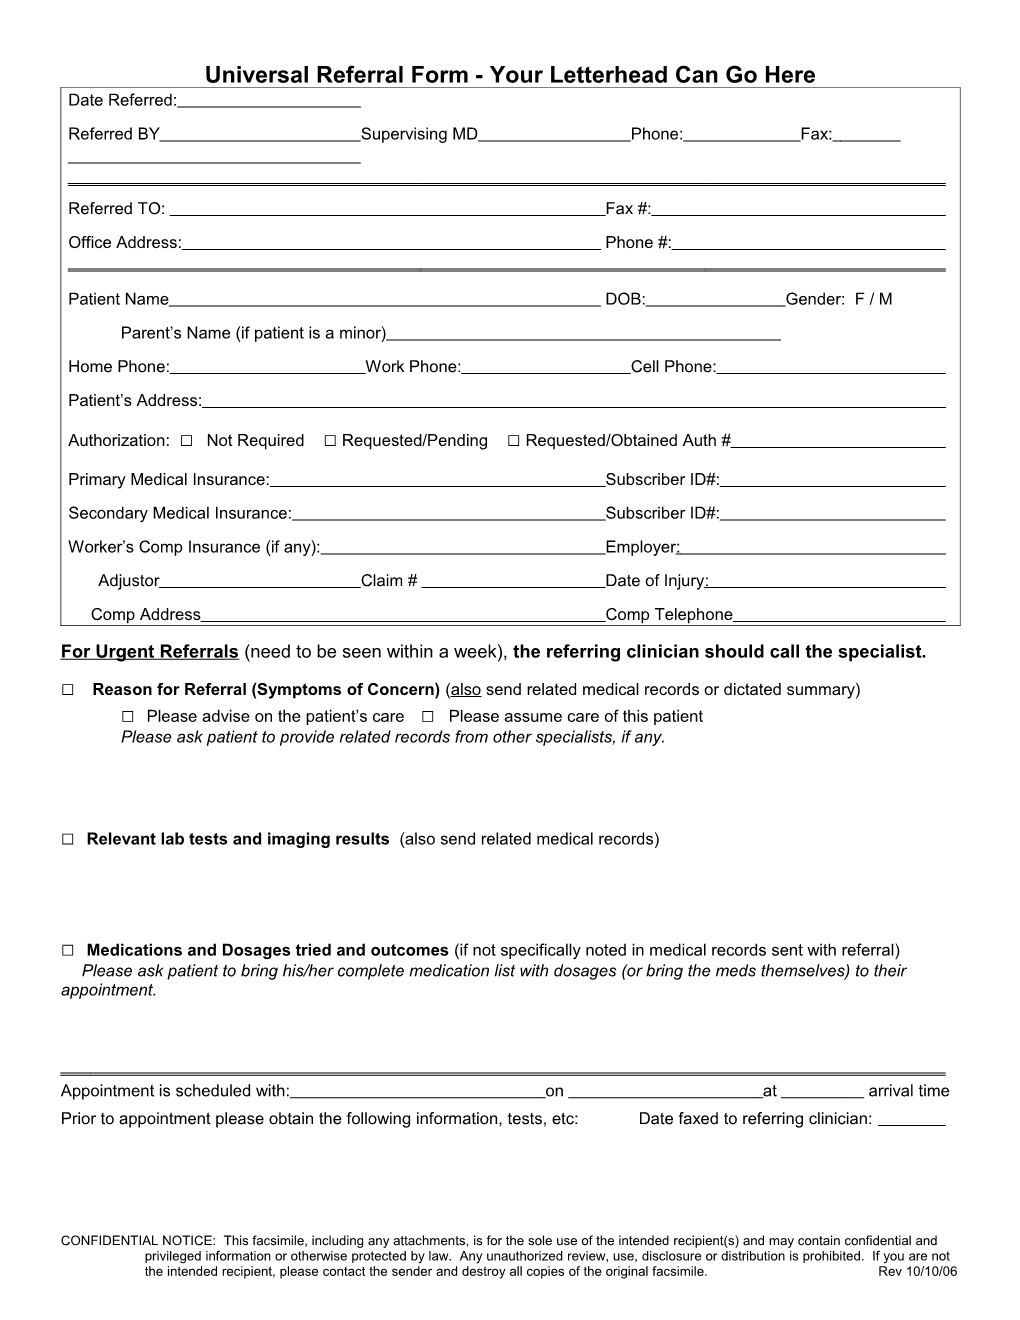 Universal Referral Form - Your Letterhead Can Go Here